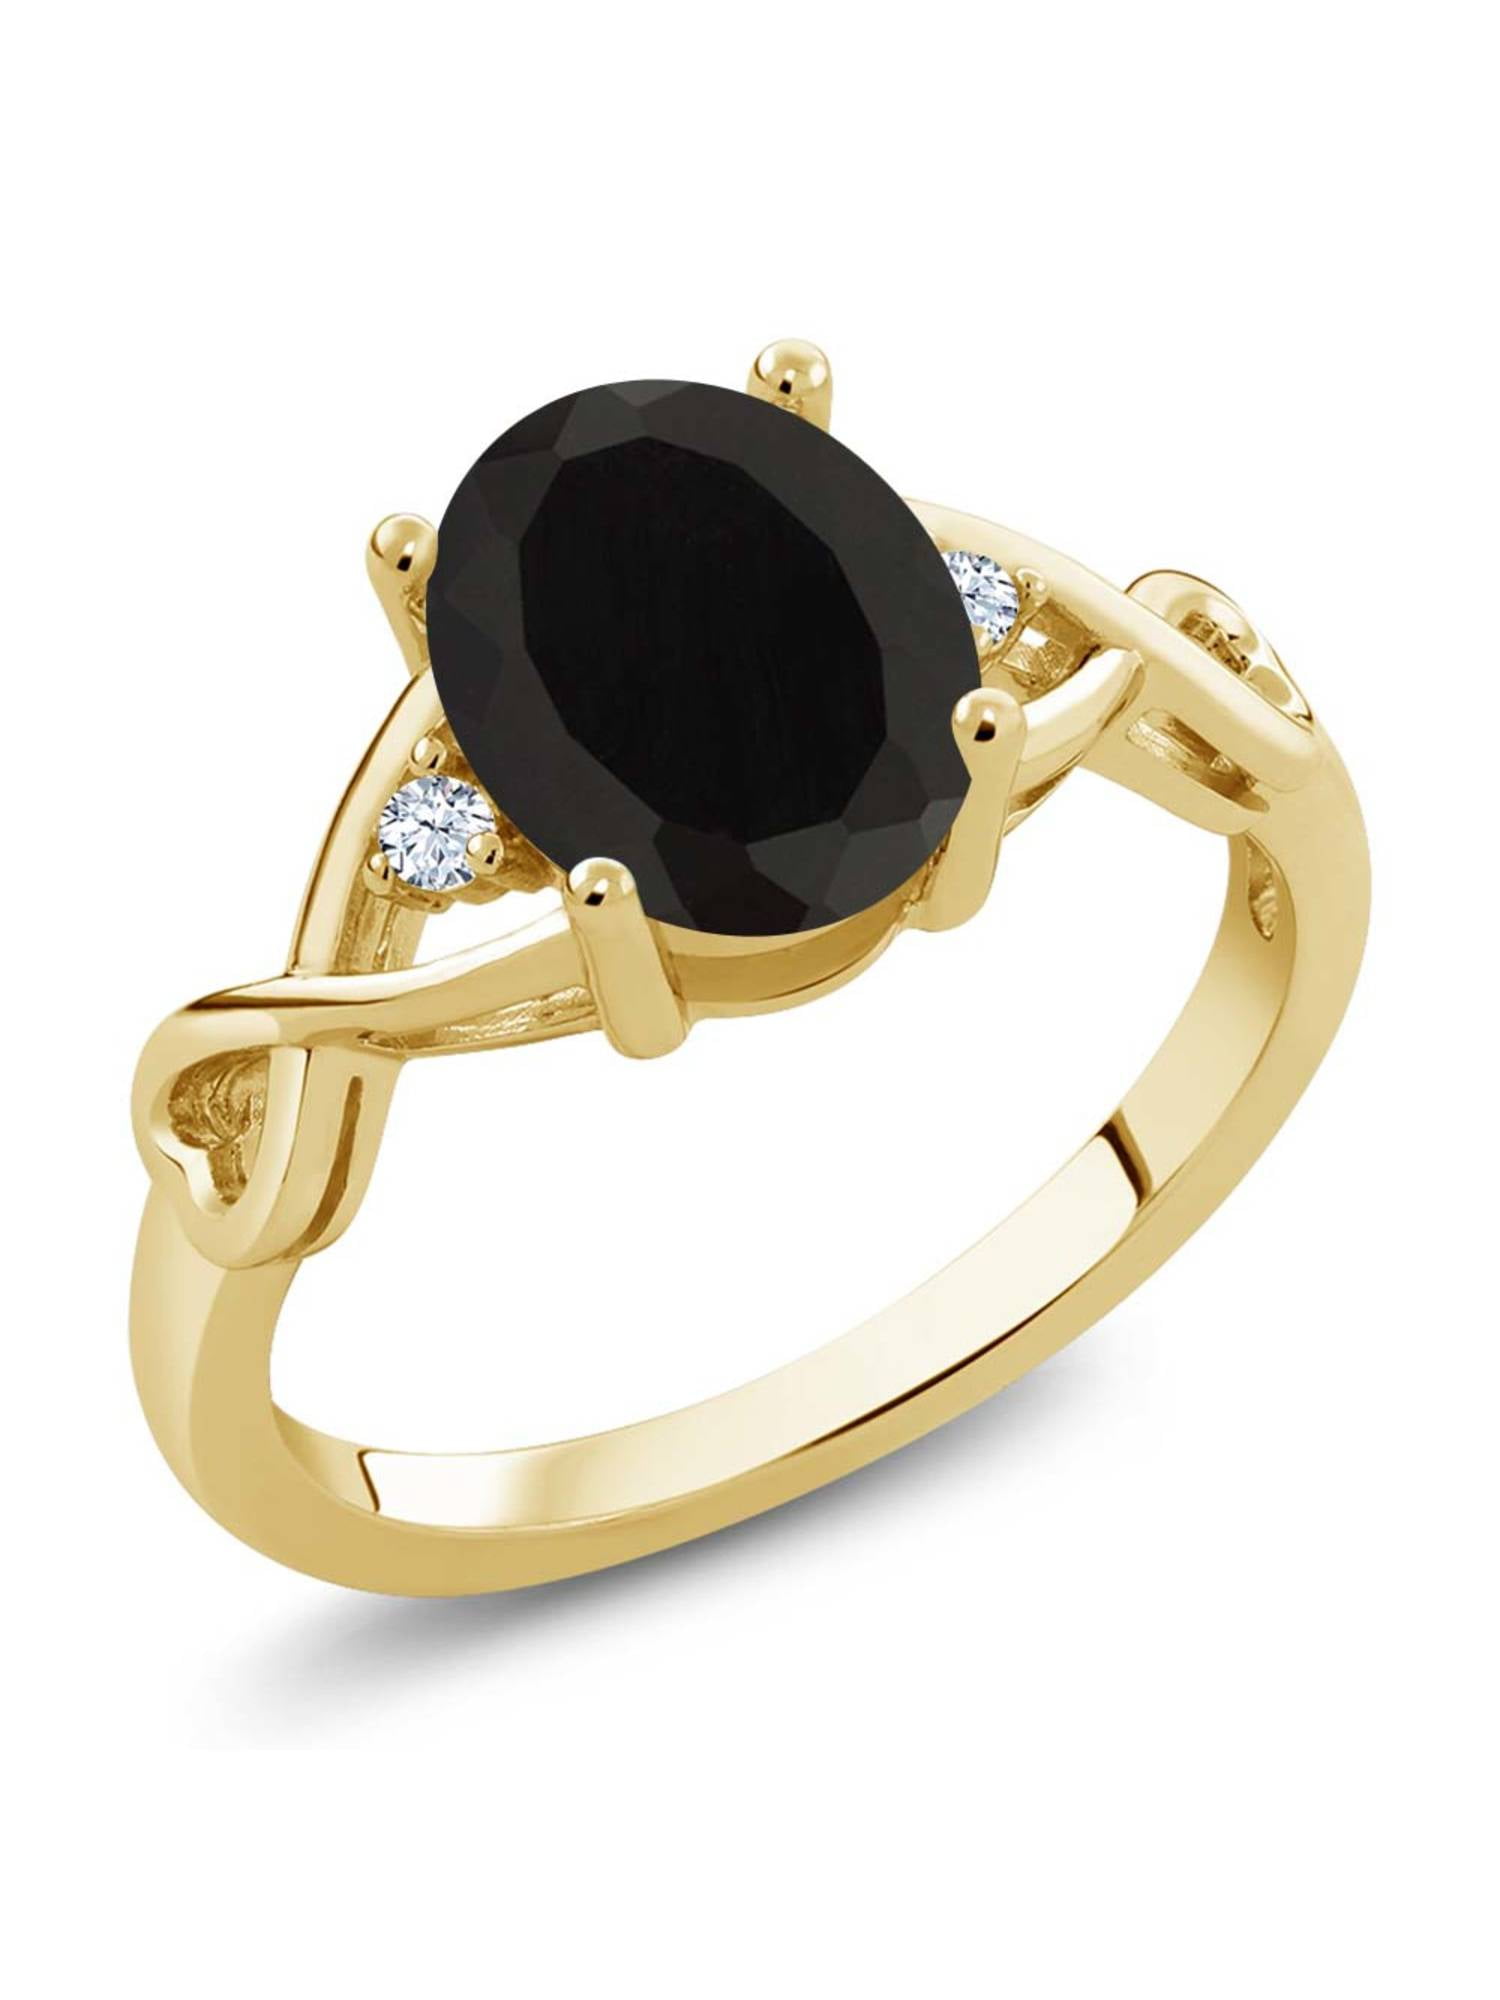 2.41 Ct Oval Natural Black Onyx 925 Sterling Silver 3-Stone Womens Ring Available in size 5, 6, 7, 8, 9 